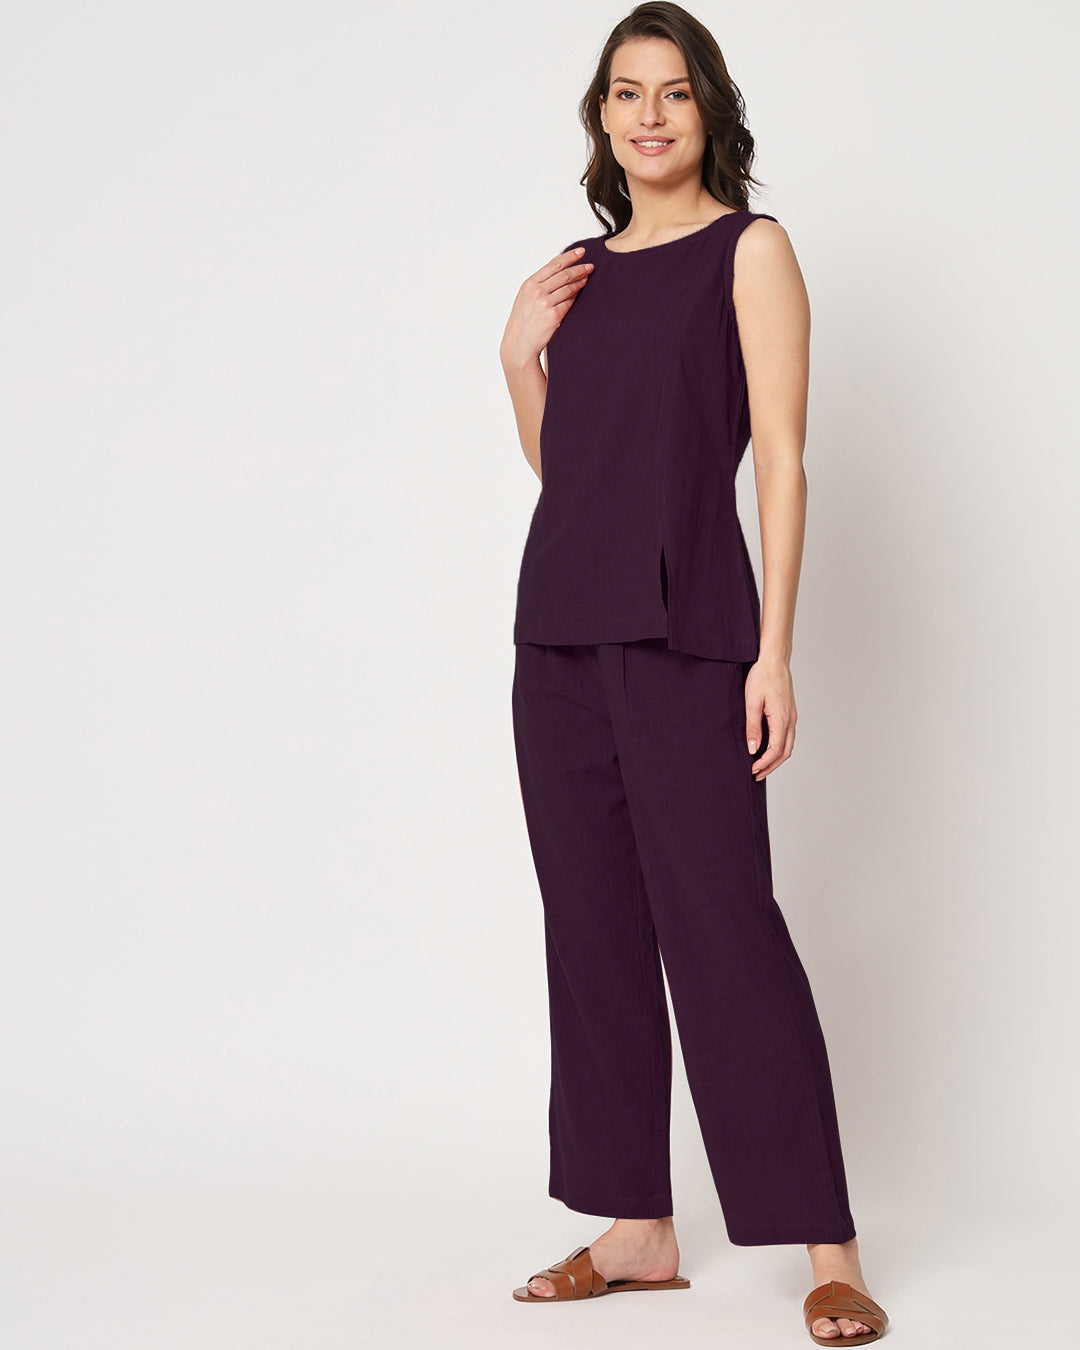 Plum Passion Sleeveless Short Length Solid Co-ord Set